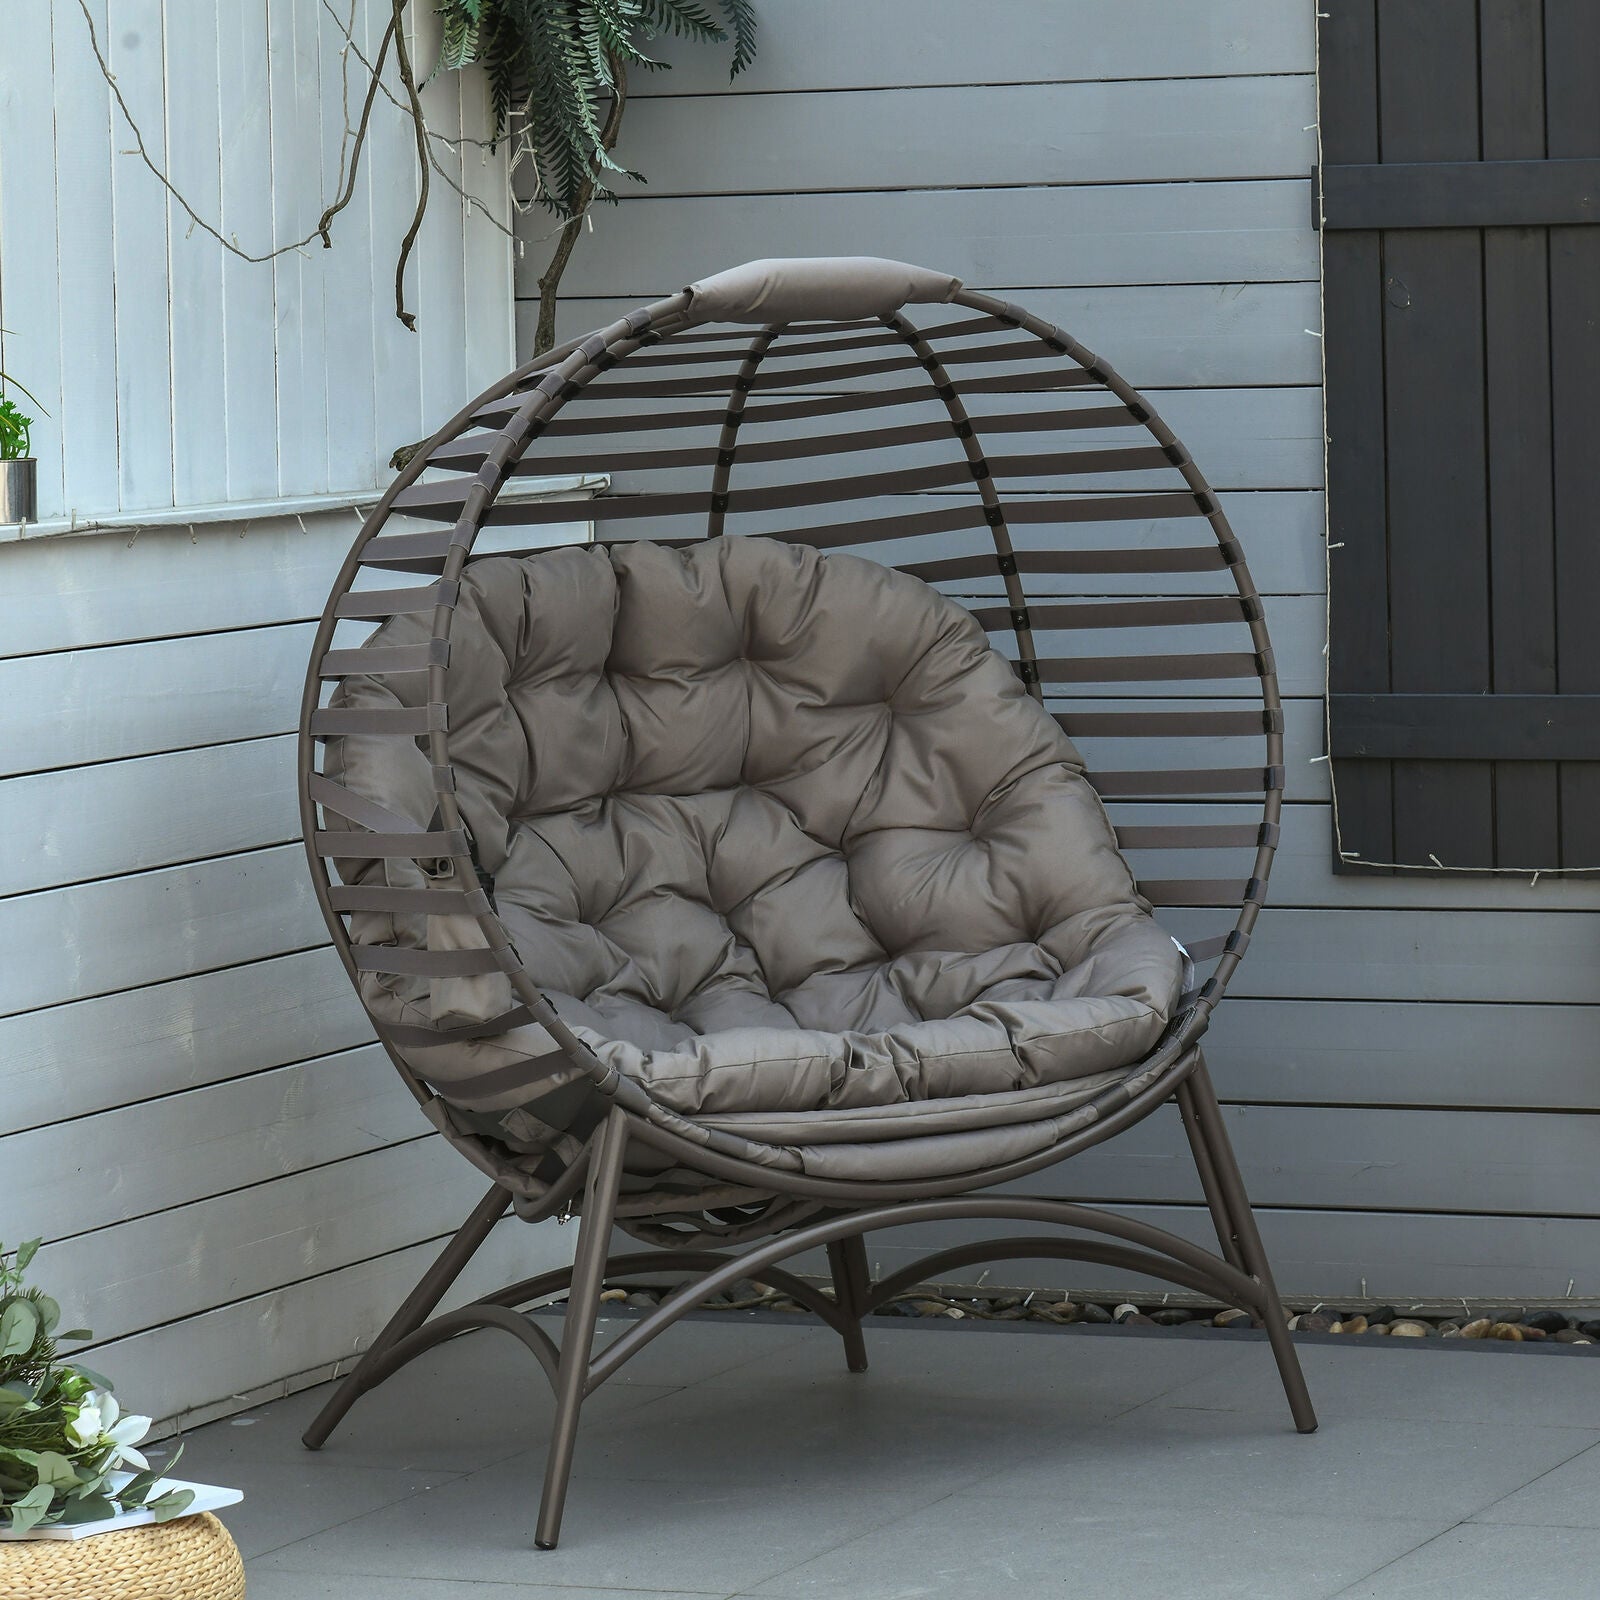 Egg Chair with Soft Cushion Steel Garden Patio Basket Chair for Indoor Outdoor